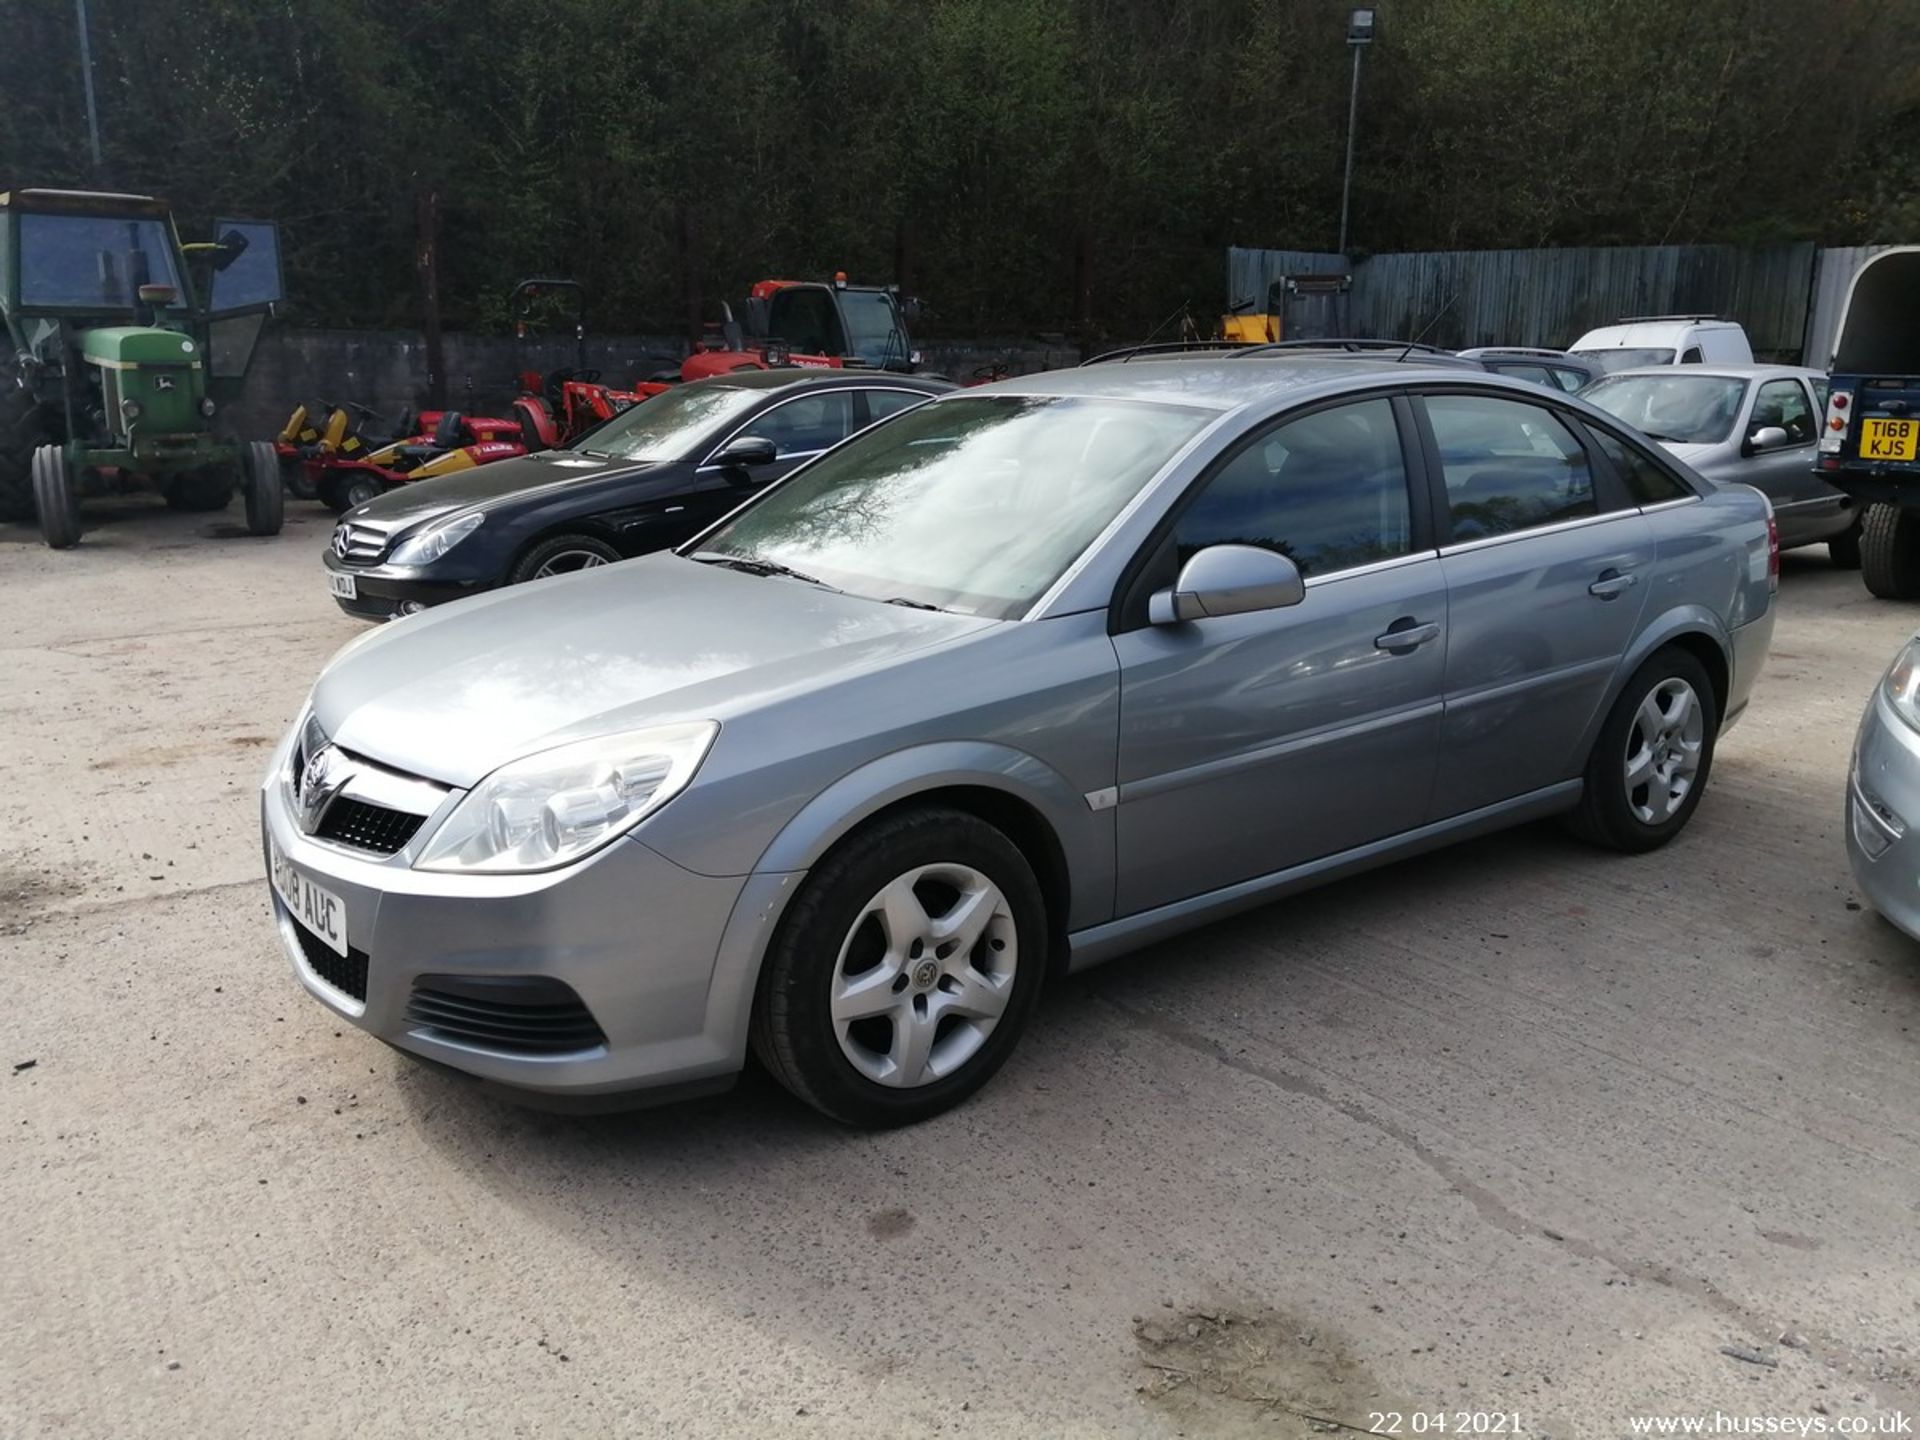 08/08 VAUXHALL VECTRA EXCLUSIV - 1796cc 5dr Hatchback (Silver) - Image 4 of 12